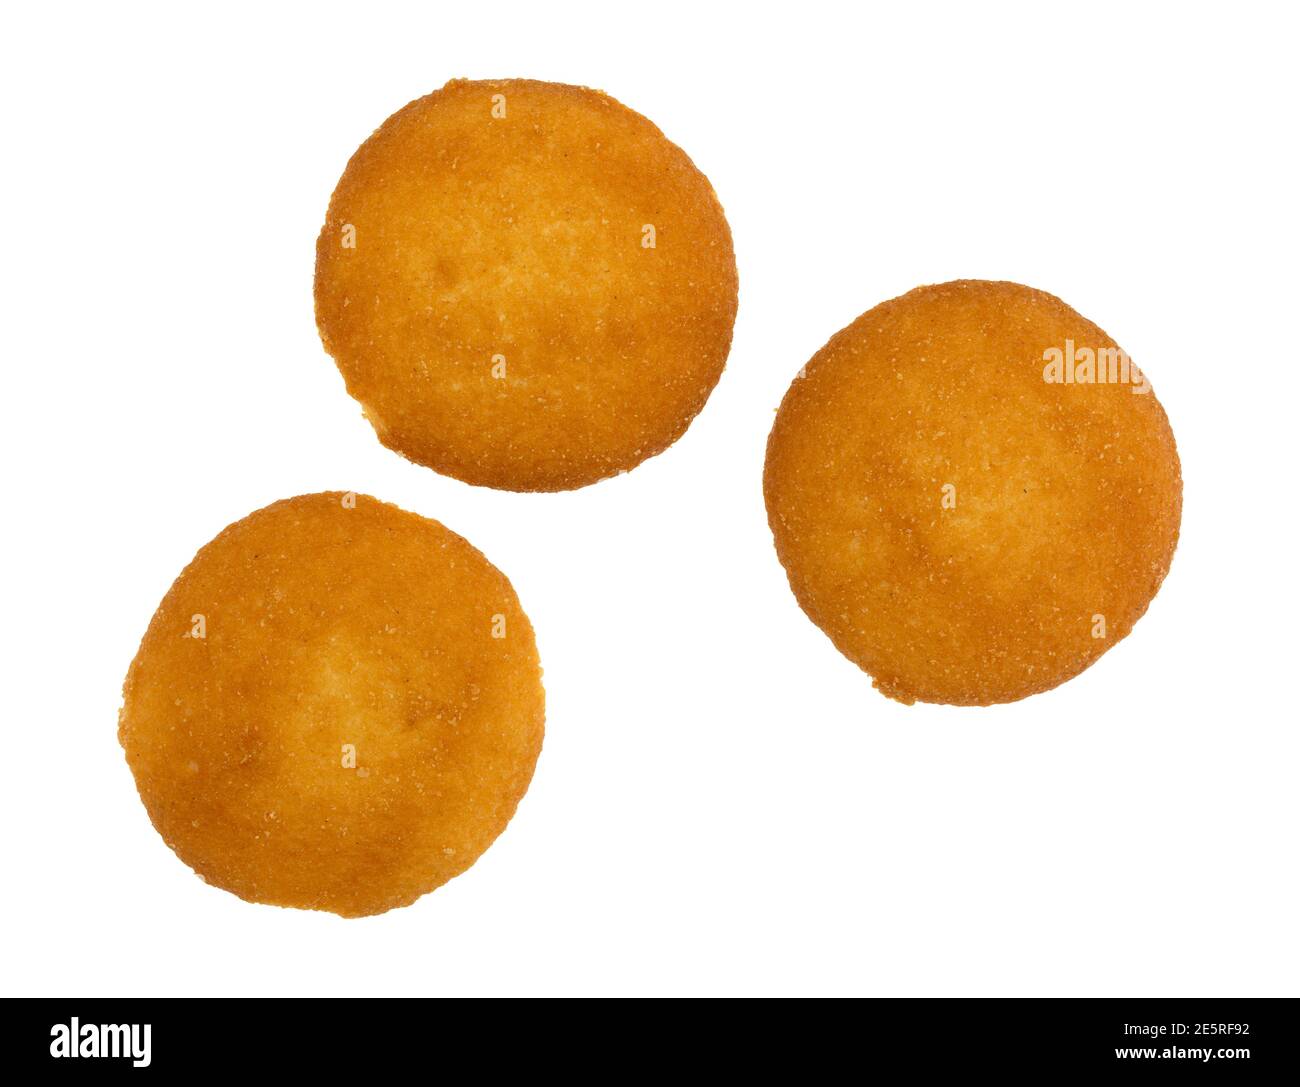 Top view of three vanilla flavor wafers isolated on a white background. Stock Photo